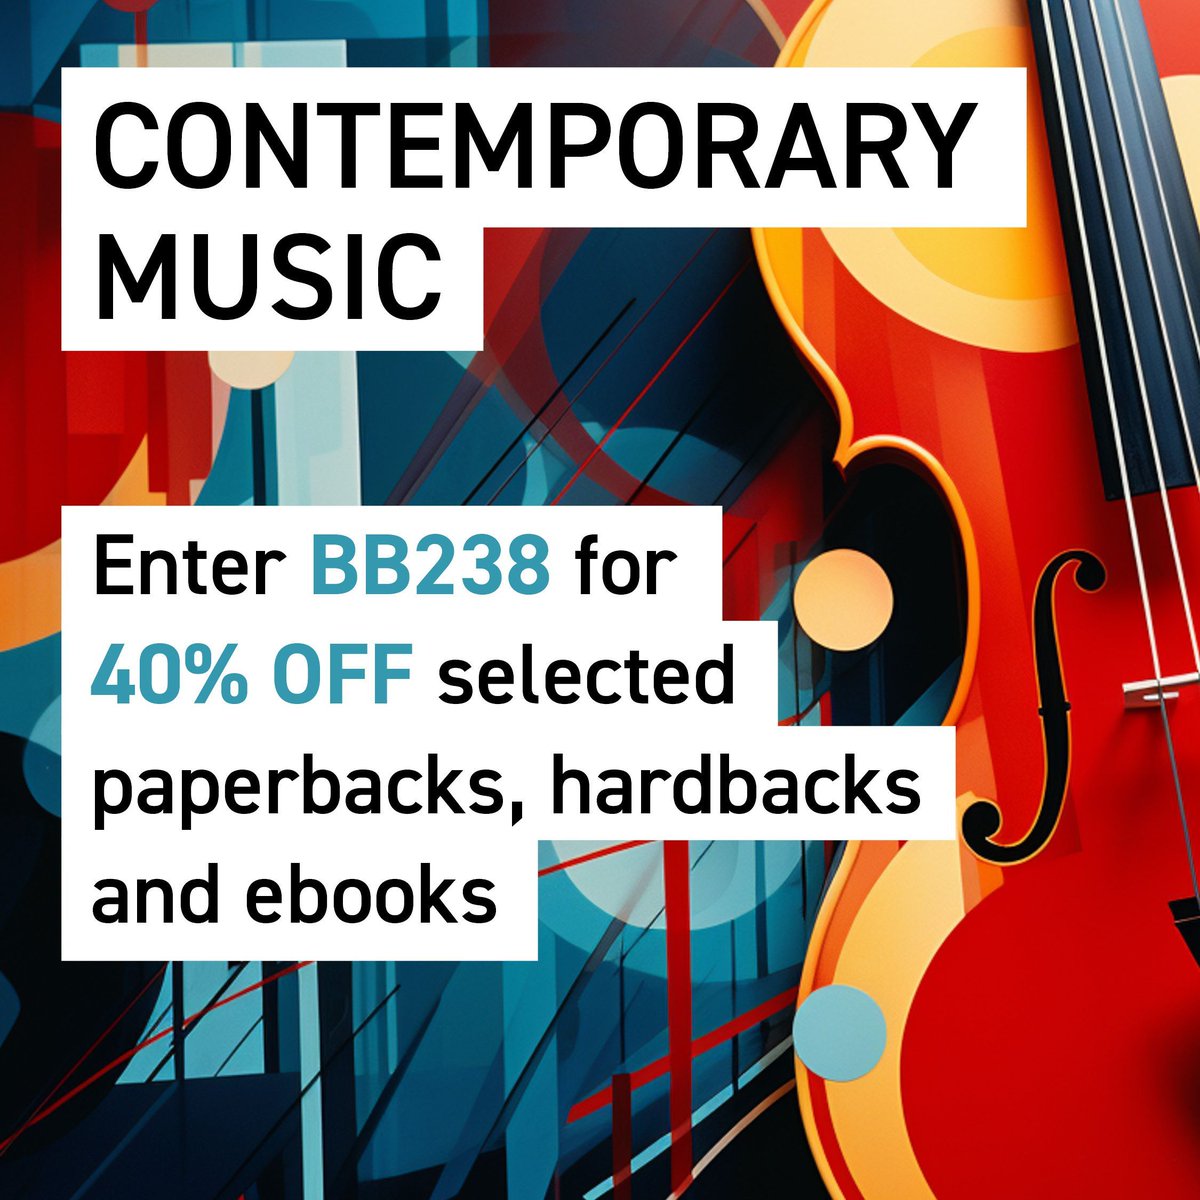 Want to hear about our new music books and campaigns like our current 40% off contemporary music books? Follow our dedicated #music account > @boydellmusic